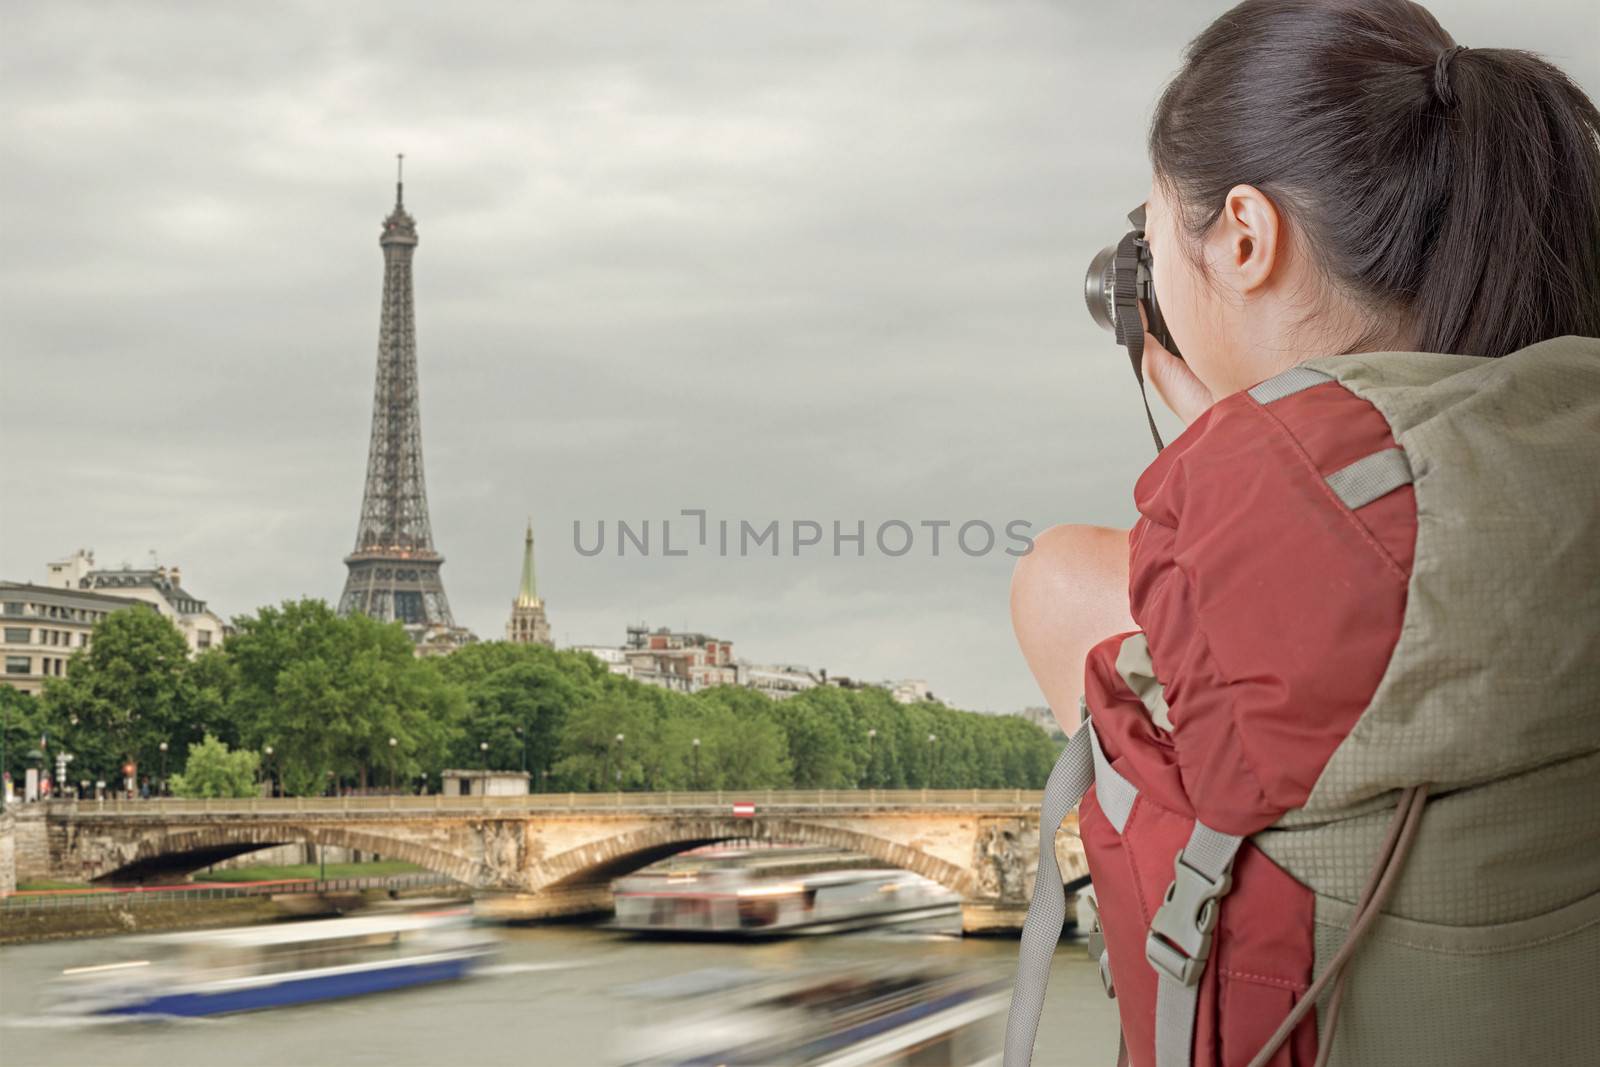 Young backpacker travel and take picture in Paris with famous Eiffel Tower.